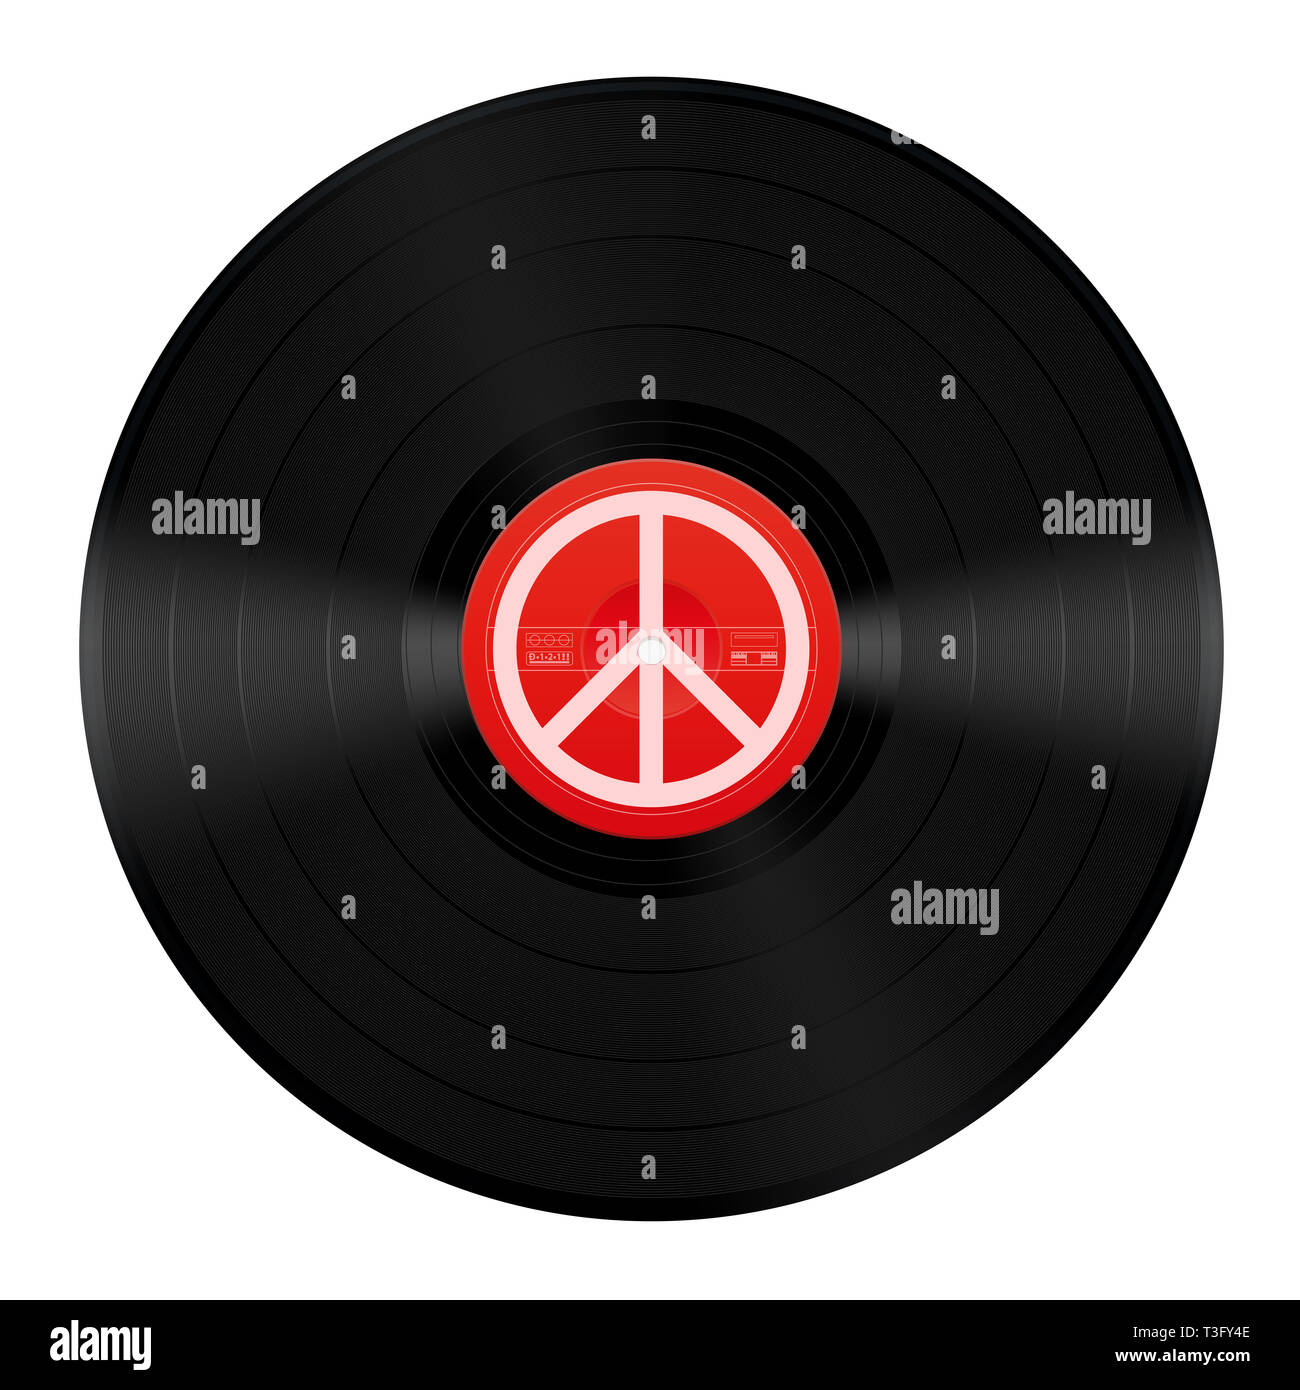 Peace music LP. Vinyl record with peace symbol - illustration on white background. Stock Photo